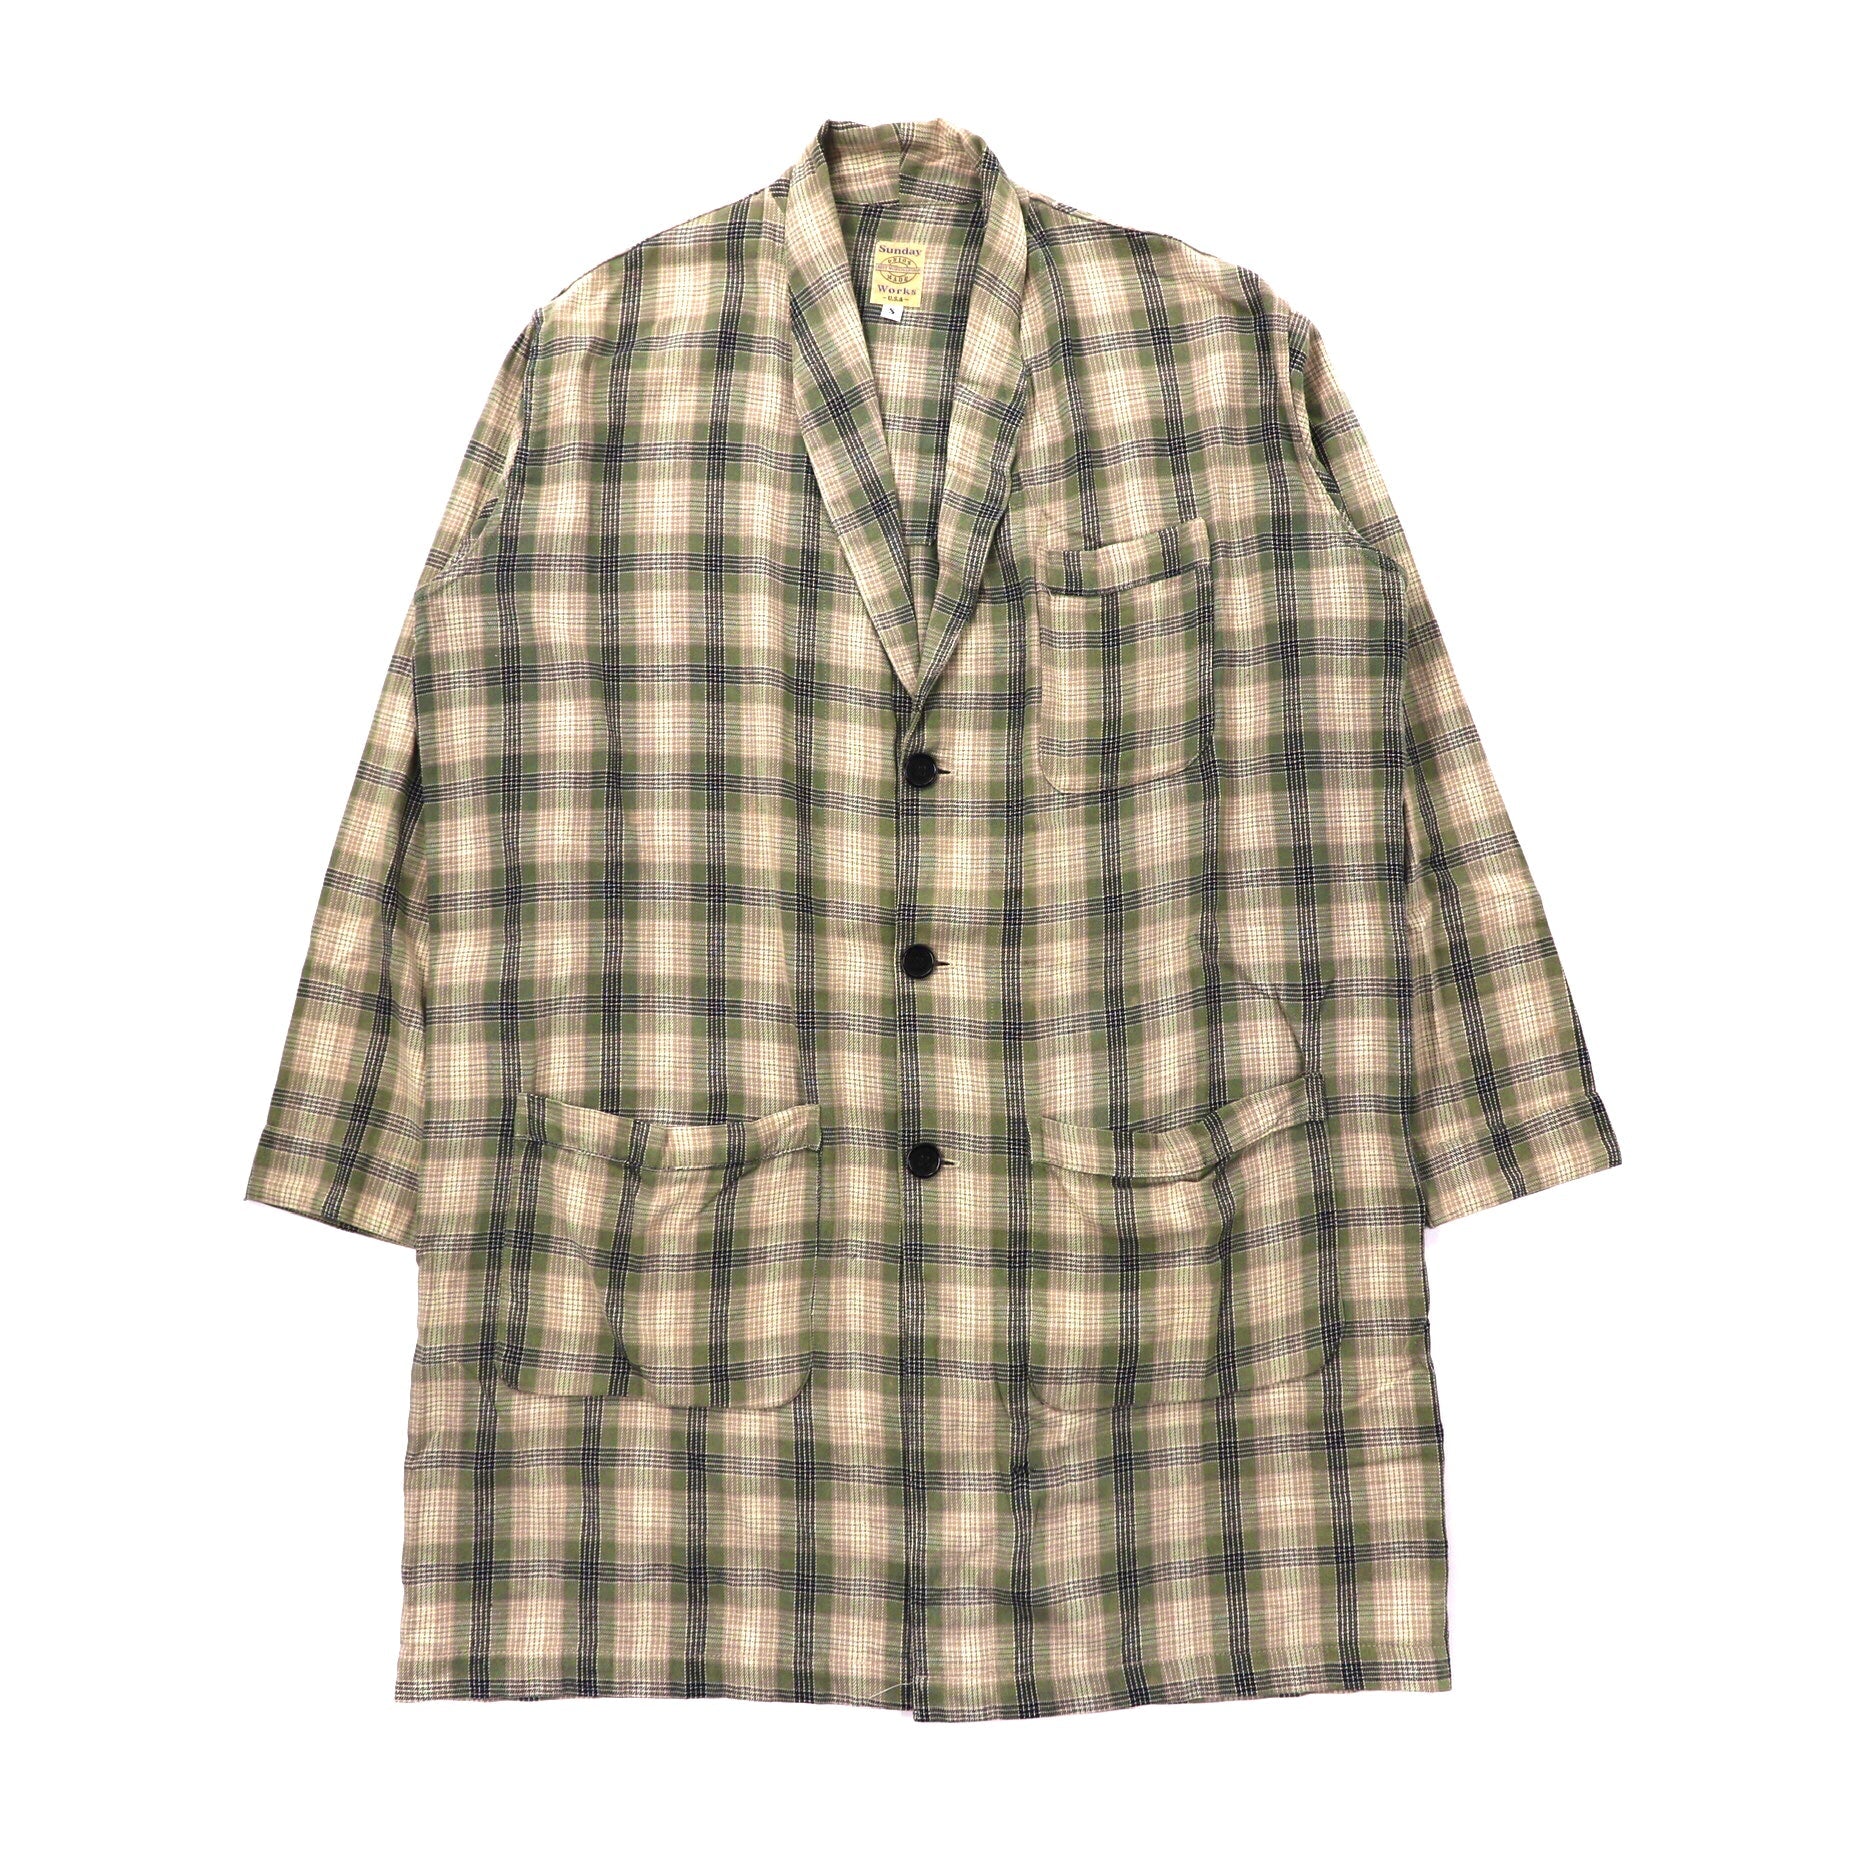 Sunday Works Gown COAT S Brown CHECKED Cotton USA Made – 日本然リトテ